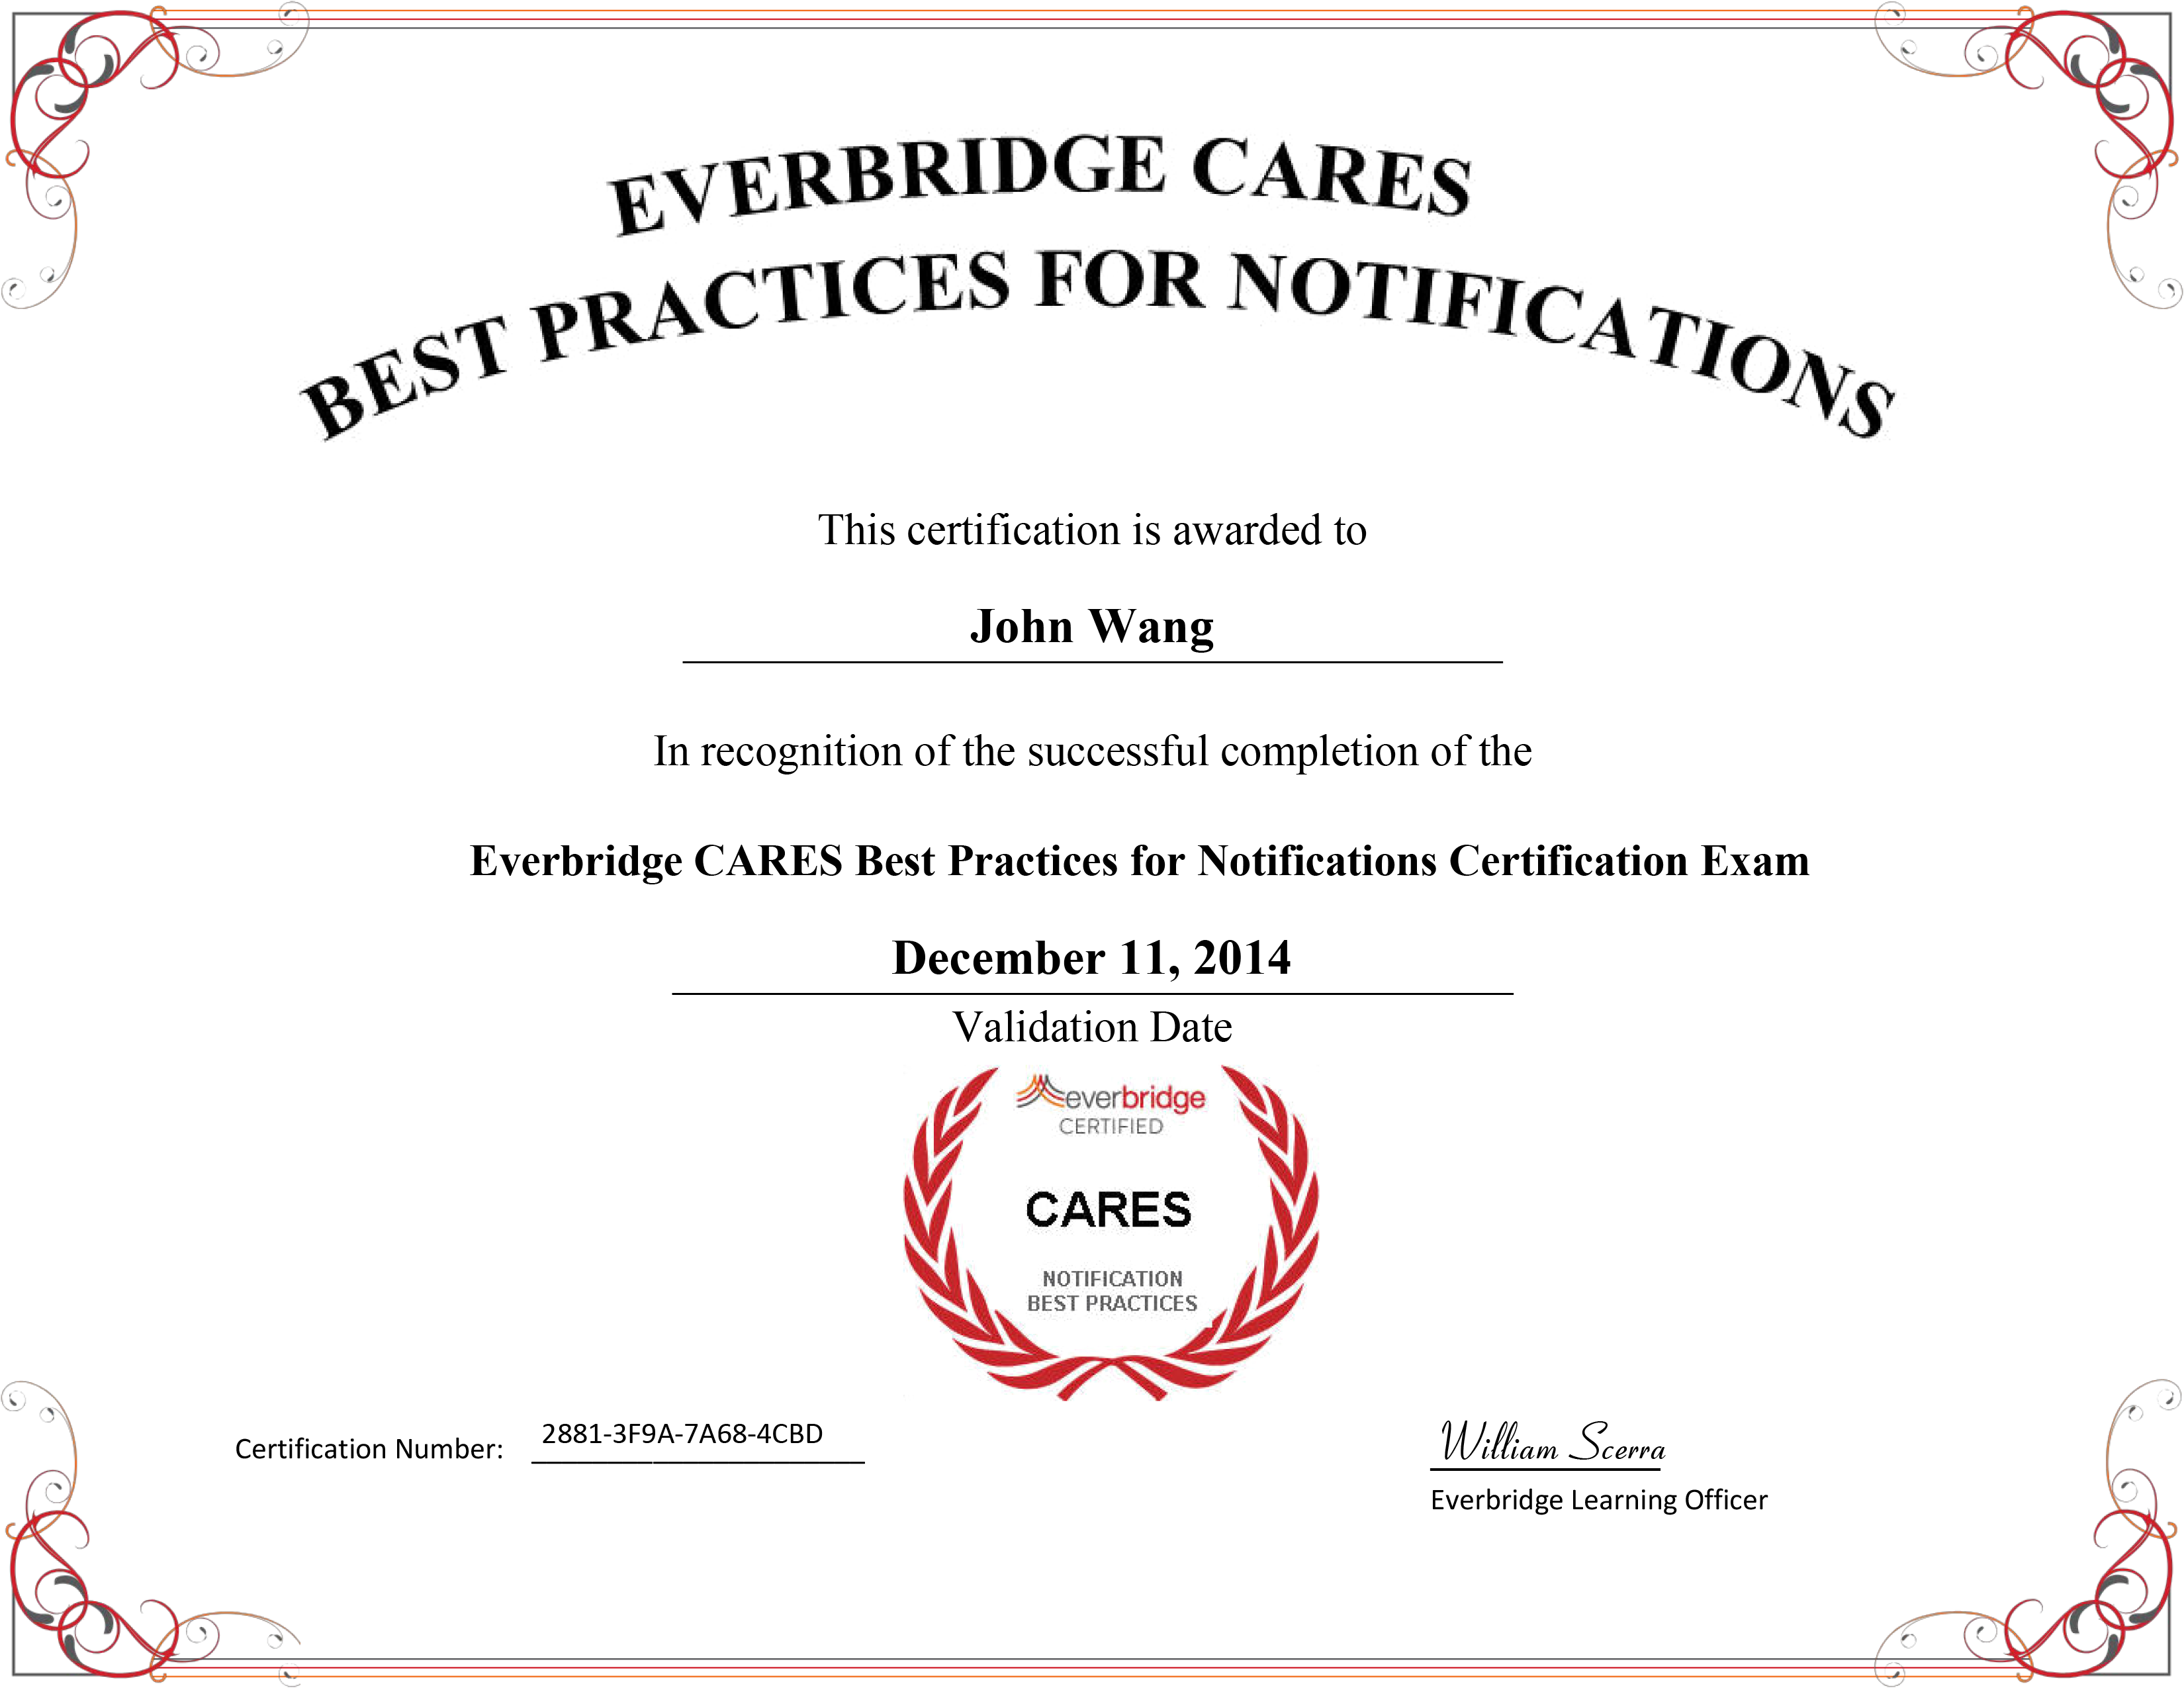 John's Everbridge CARES Best Practices for Notifications Certification from Everbridge